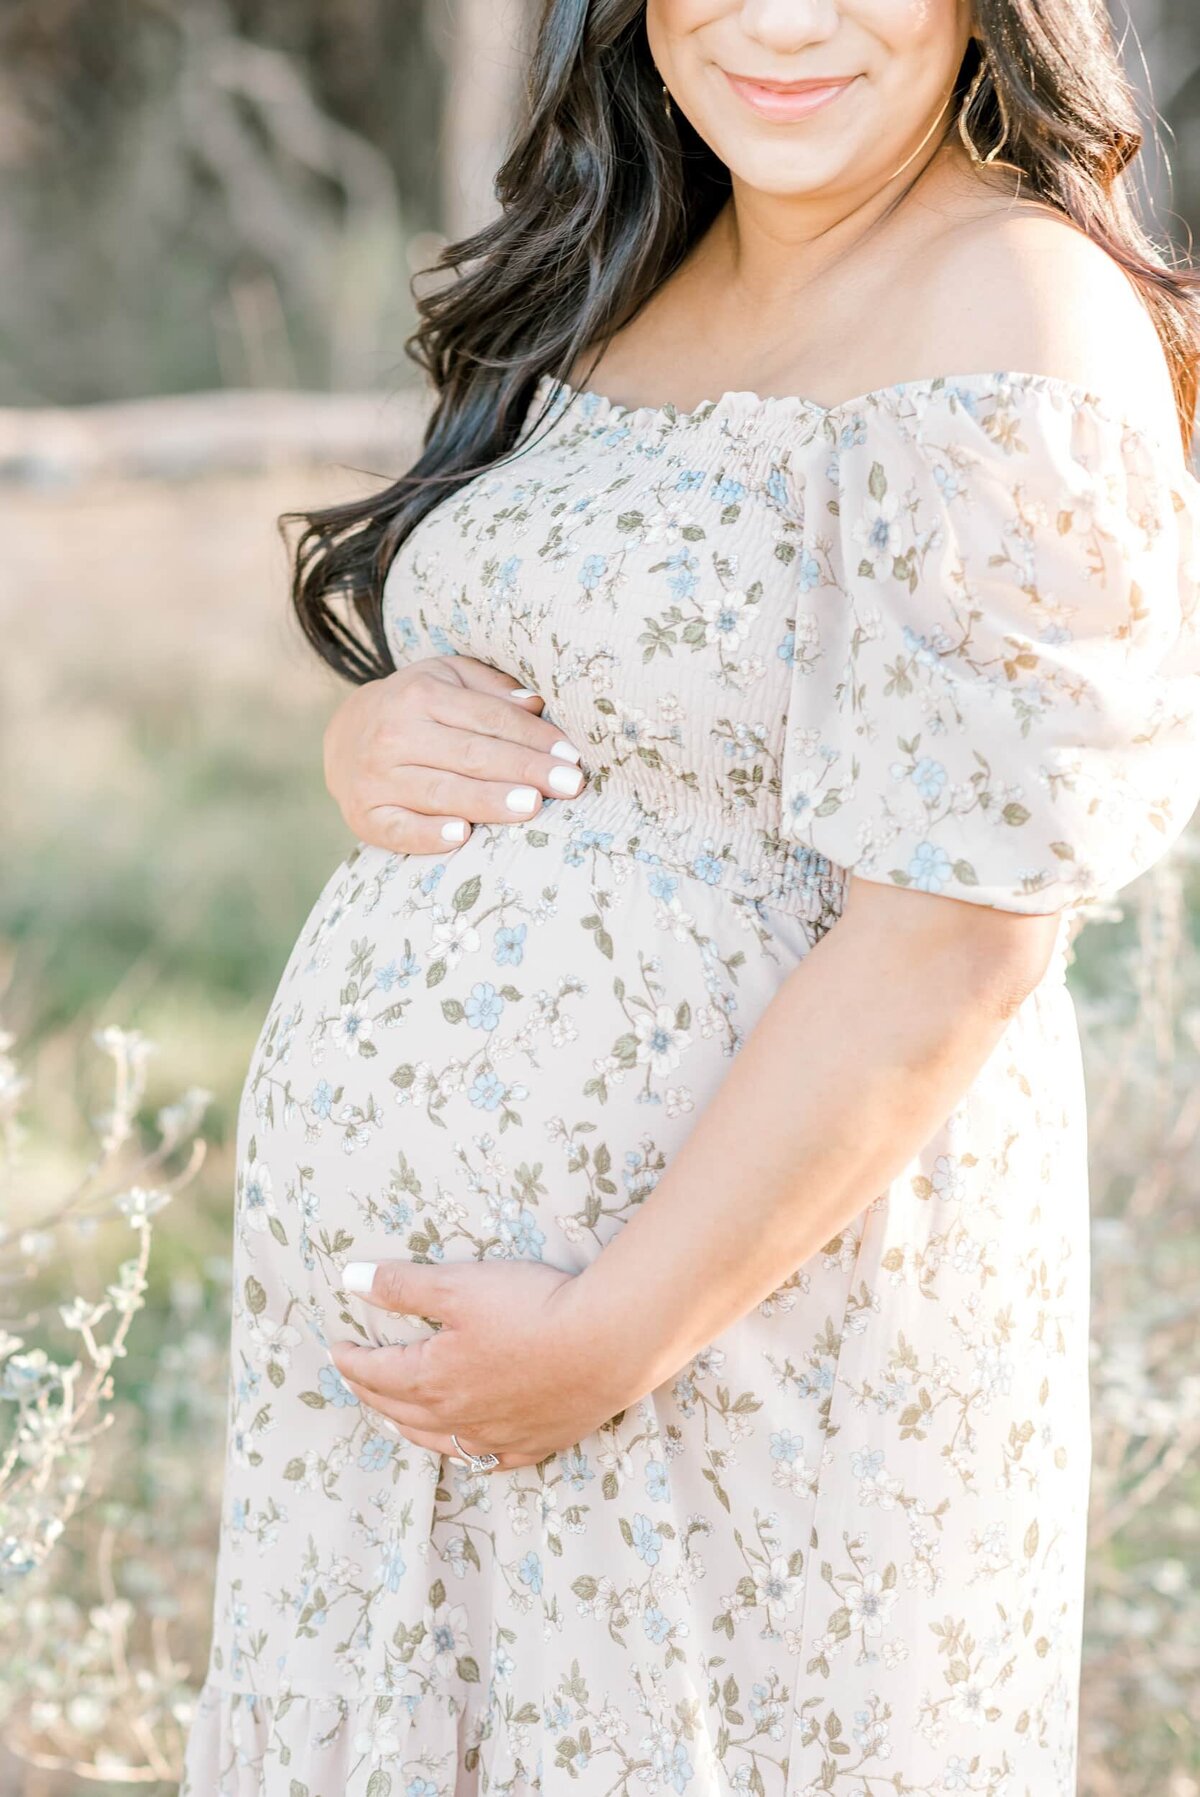 San-Antonio-Maternity-Photography-3.4.23- Melanie_s Maternity Session- Laurie Adalle Photography-20